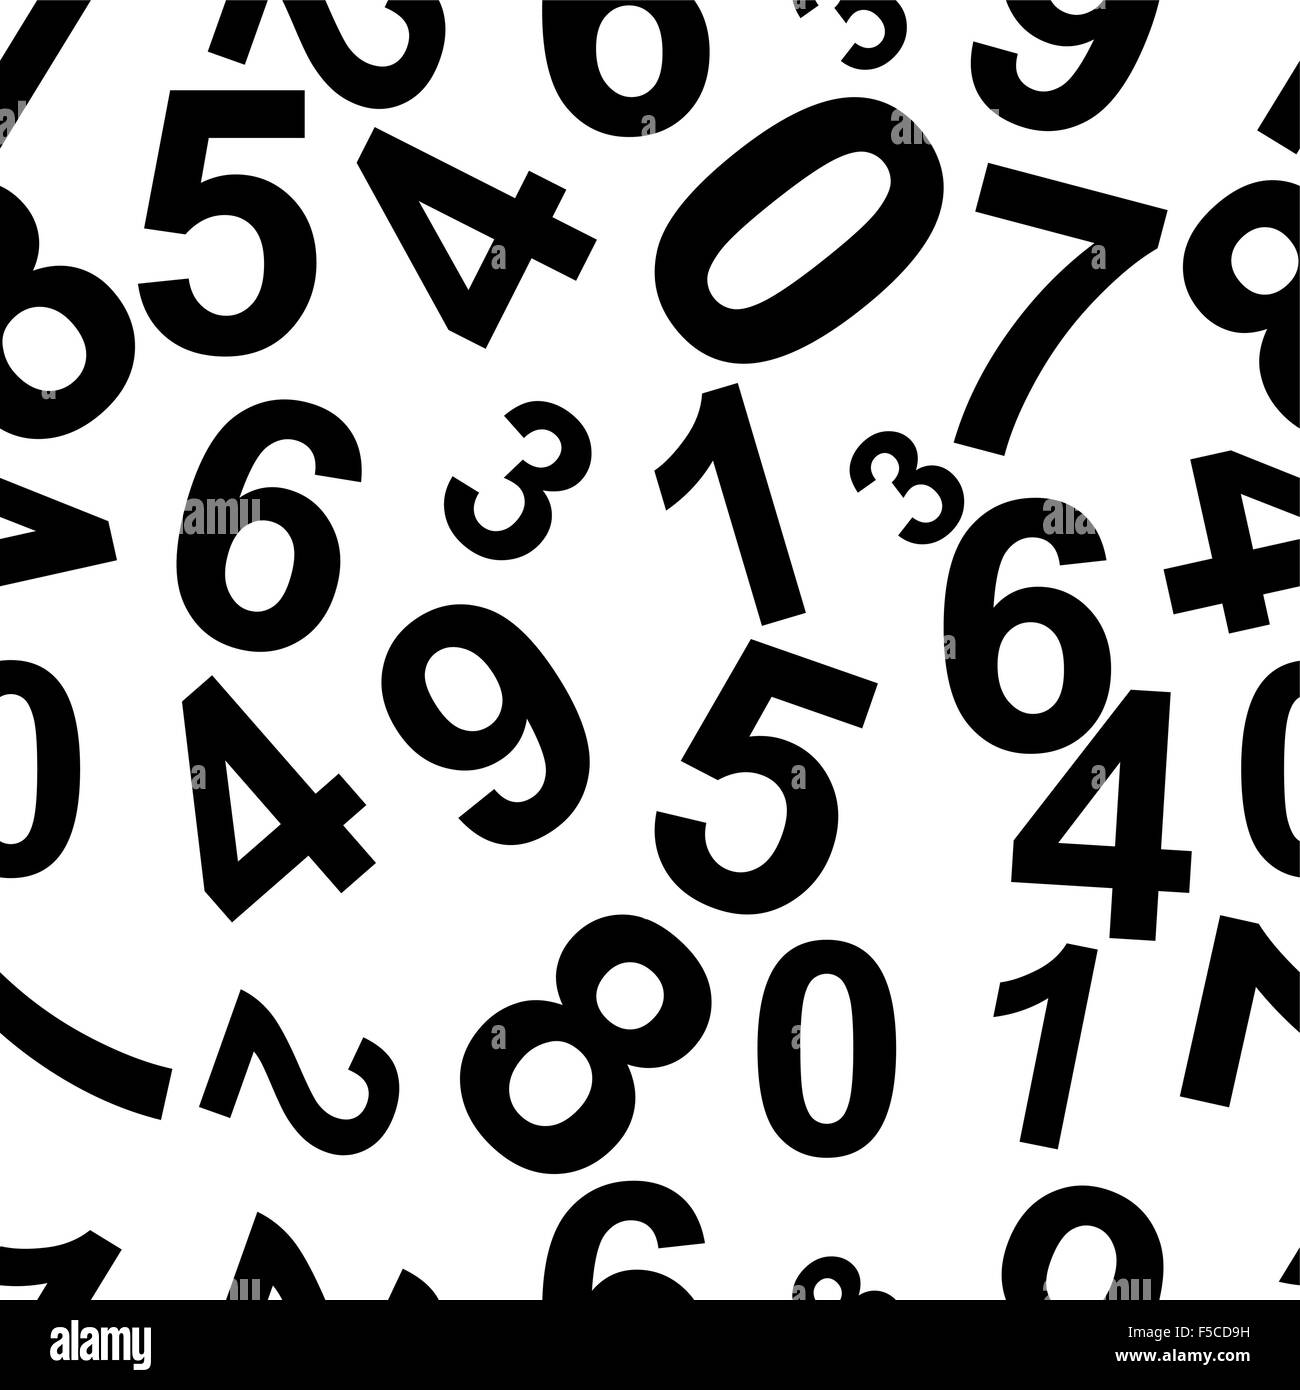 Seamless repeating pattern consisting of the numbers.Vector Stock Vector